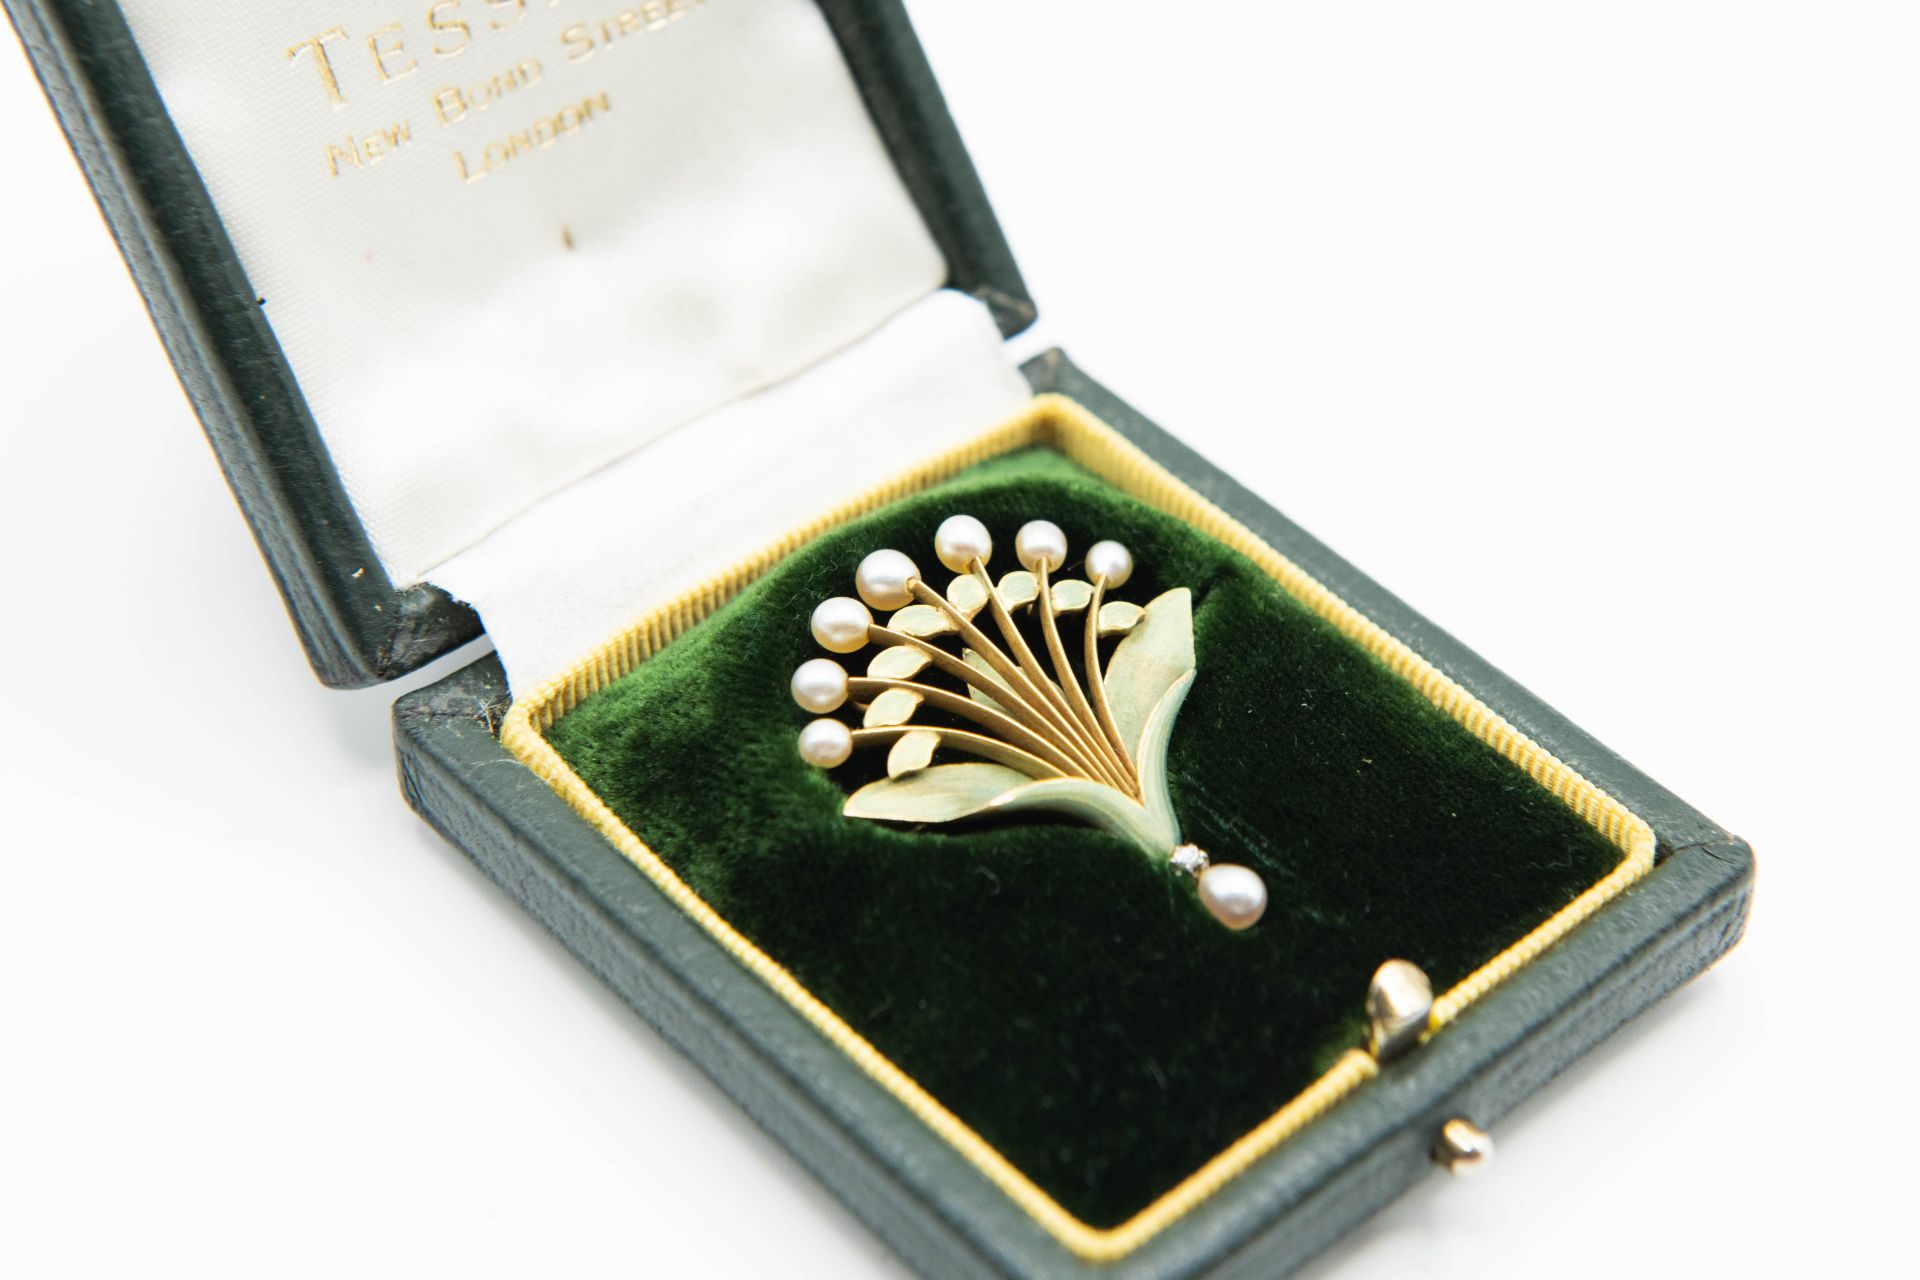 AN ART NOUVEAU 18CT YELLOW GOLD, ENAMEL AND SEED PEARL BROOCH BY AUGUSTE BEAUDOUIN